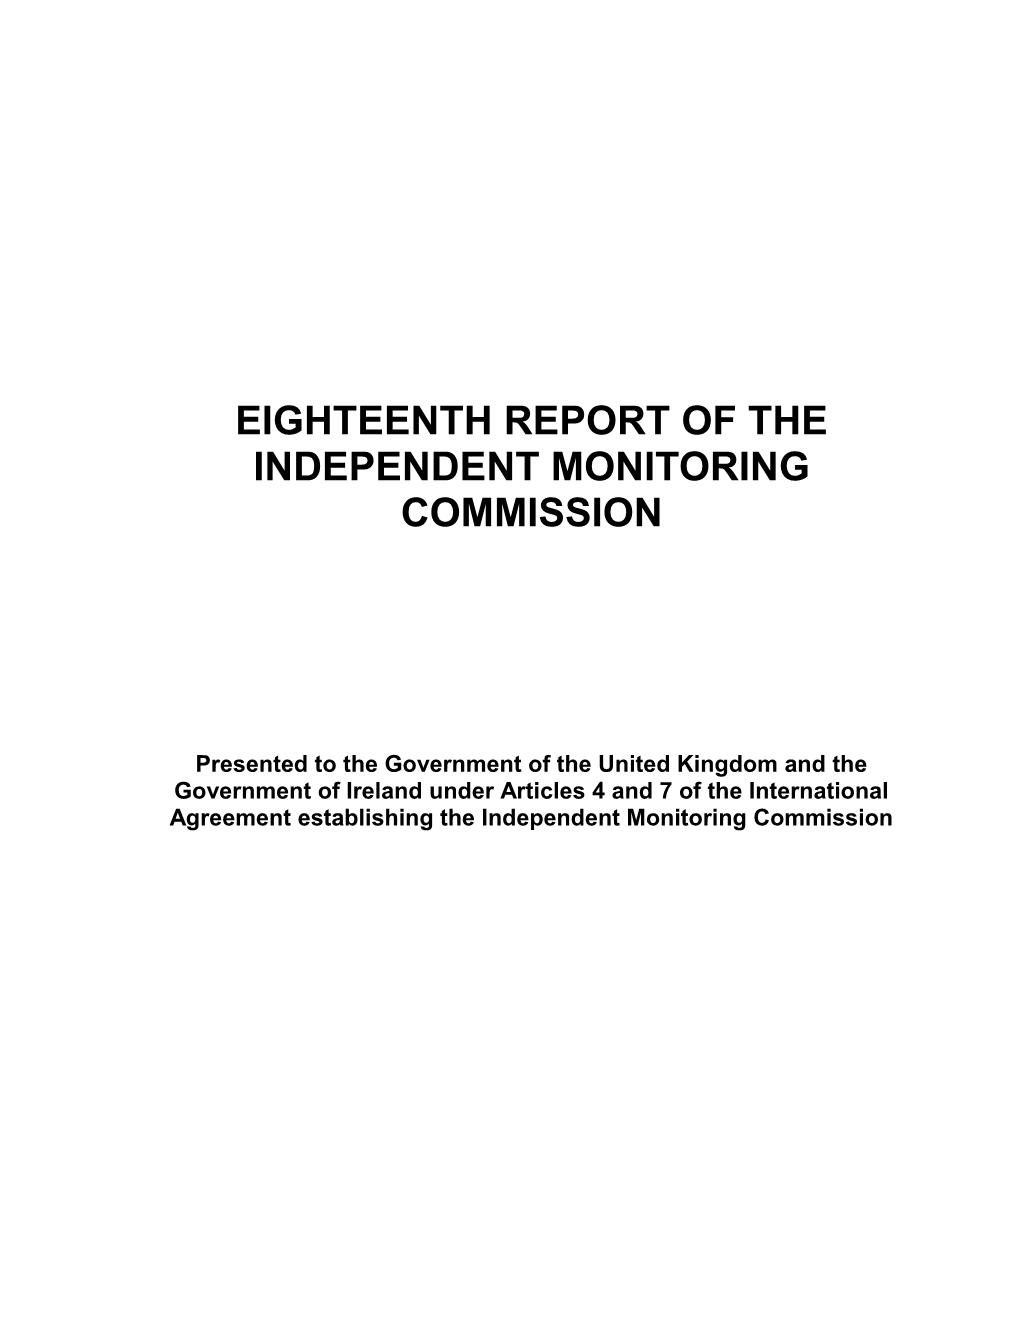 2Nd Meeting of the Independent Monitoring Commission